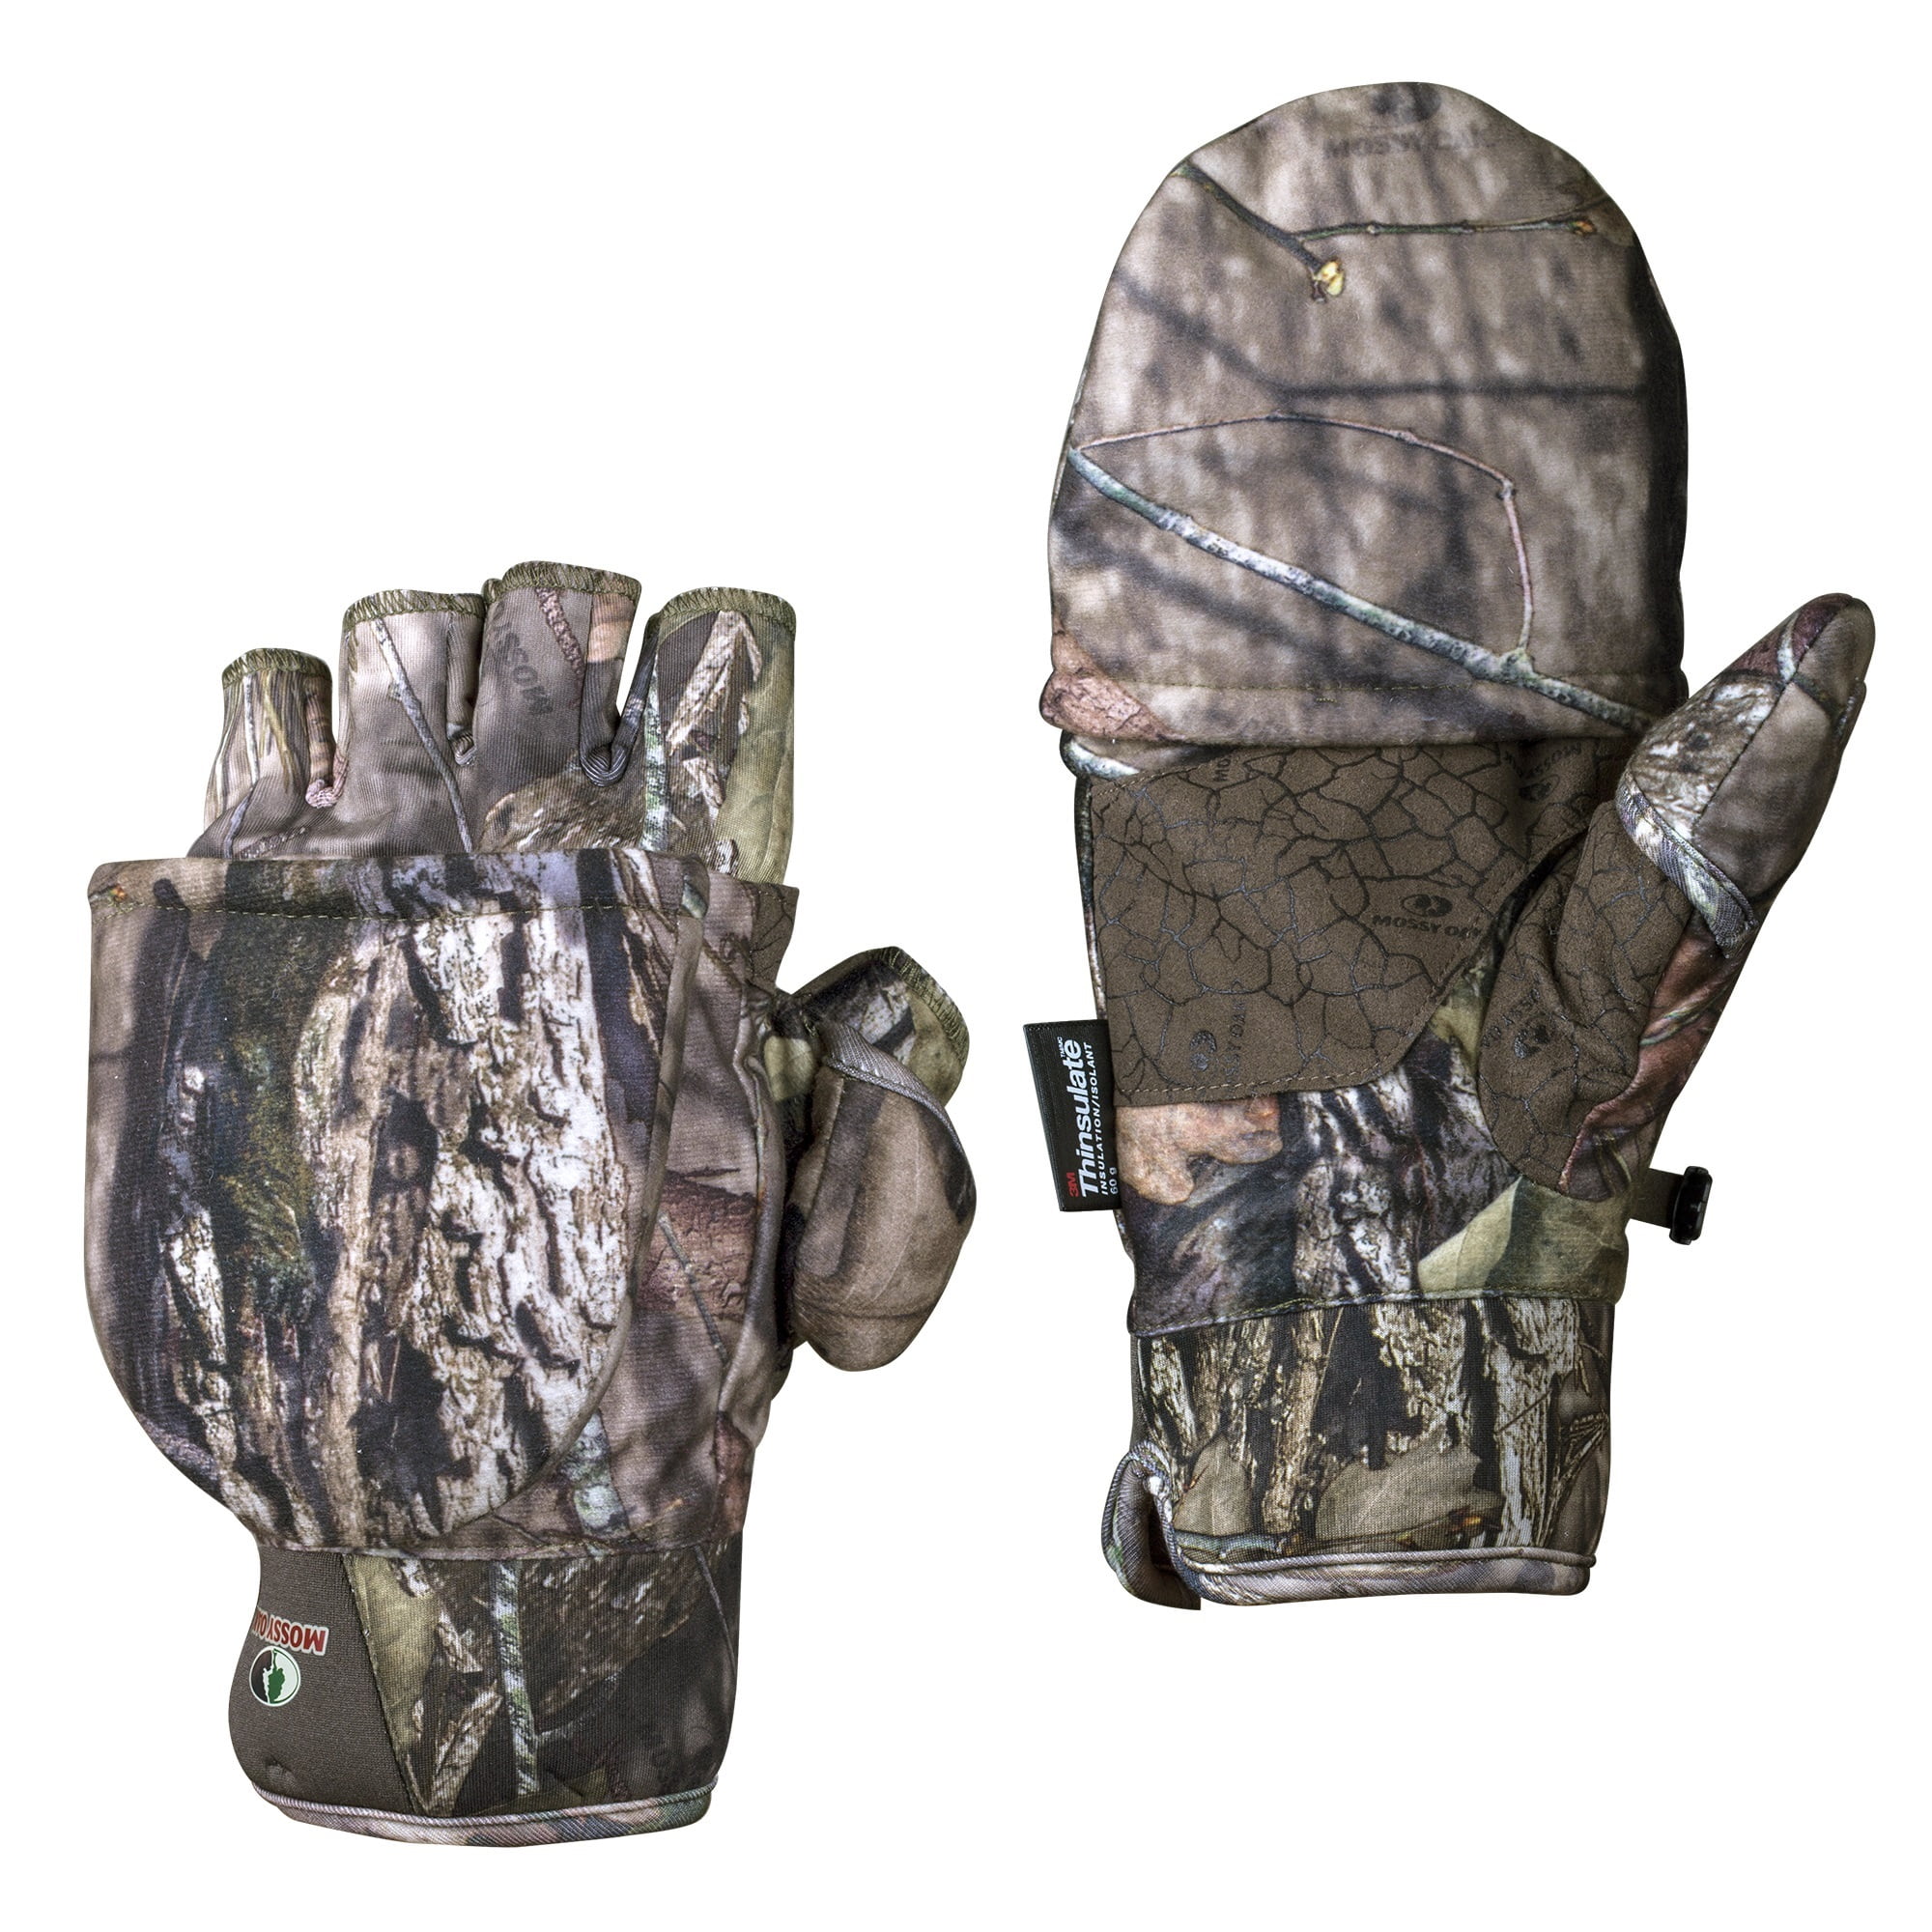 NEW Mens Mossy Oak Break-Up Country Camouflage Hunting Gloves Non-Slip One Size 